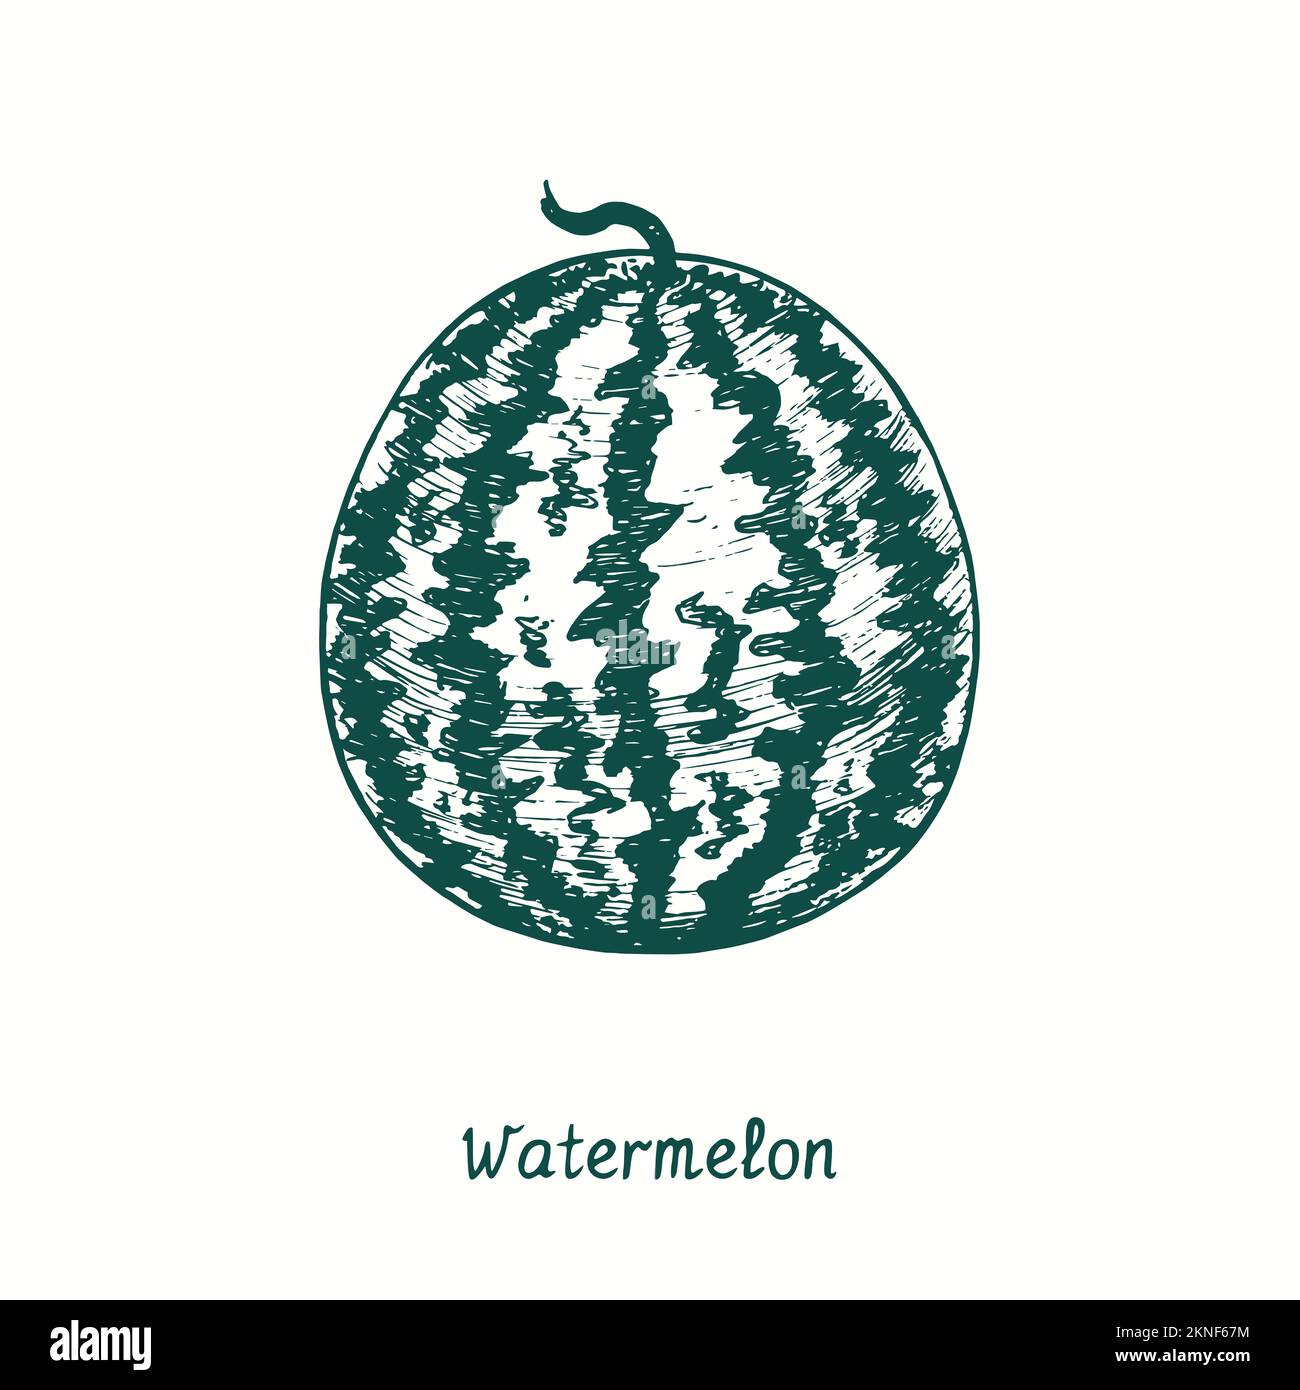 Watermelon (Citrullus lanatus) whole. Ink black and white doodle drawing in woodcut style Stock Photo